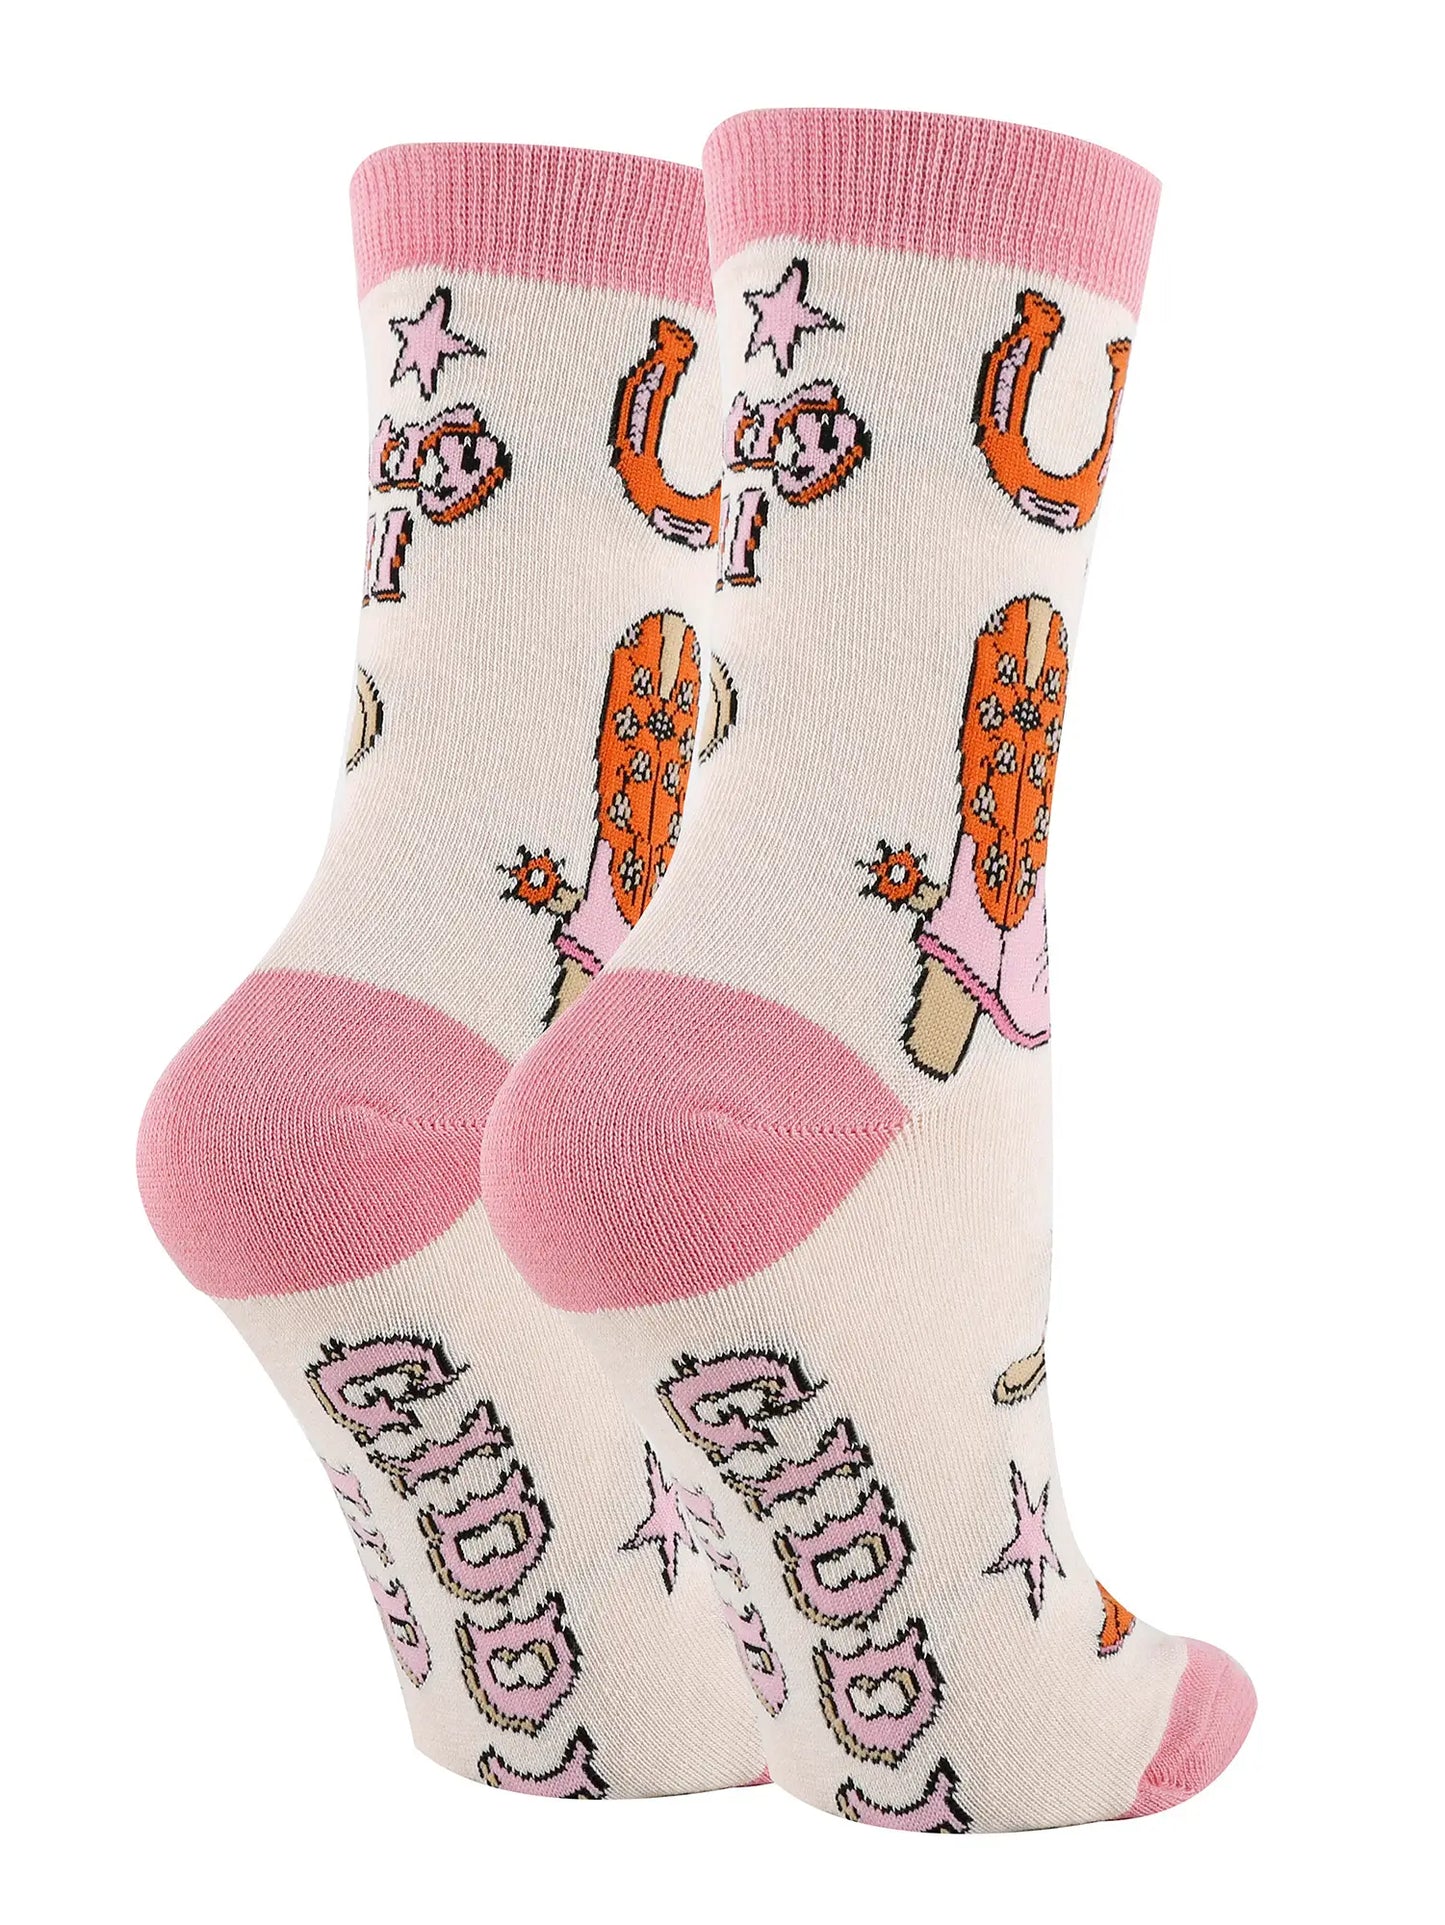 Giddy Up | Women's Funny Cotton Crew Socks